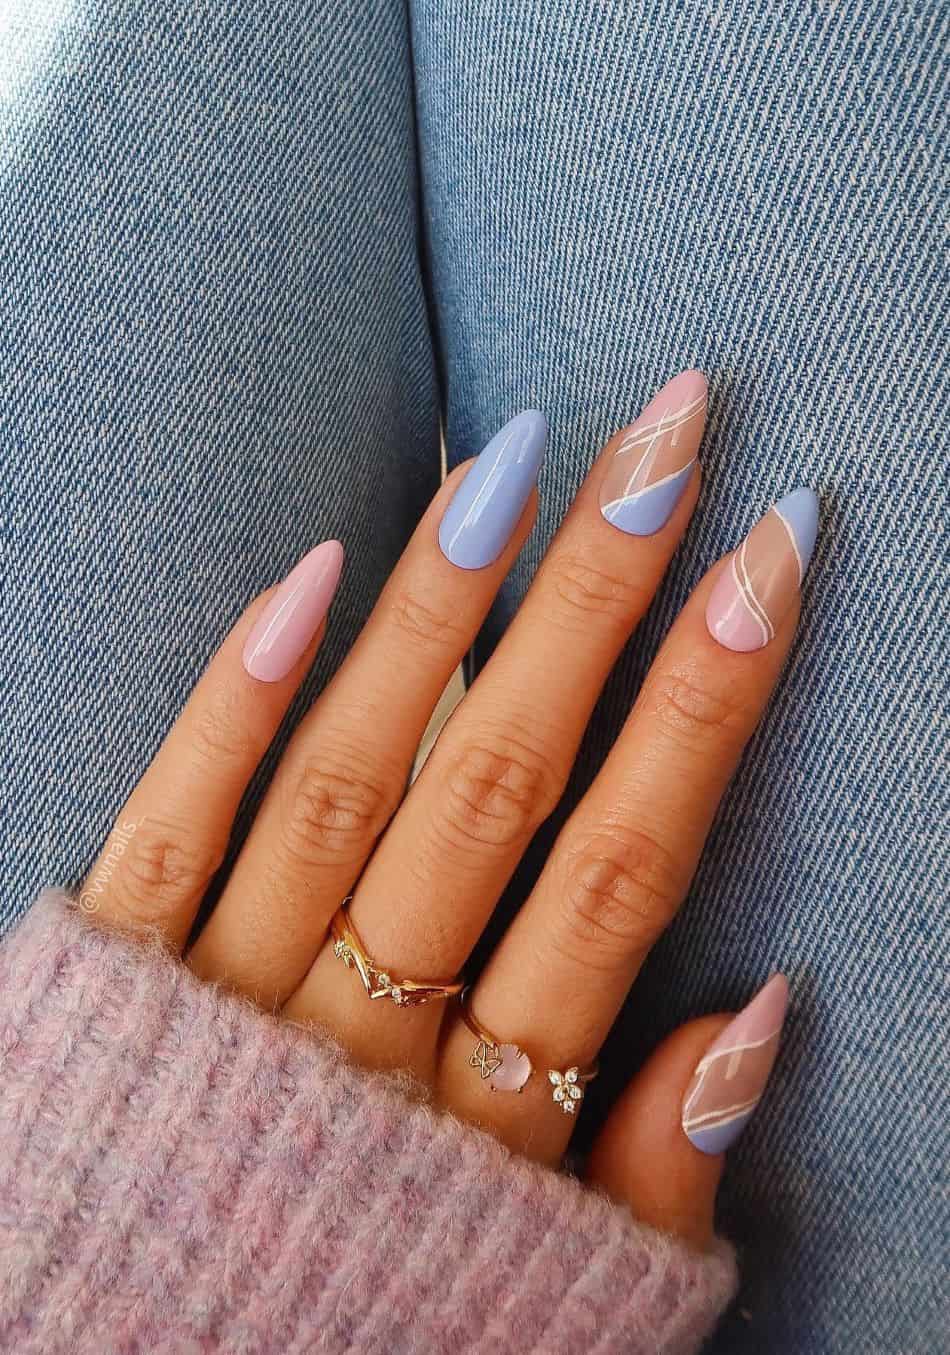 A hand with pink and periwinkle nails with white line details